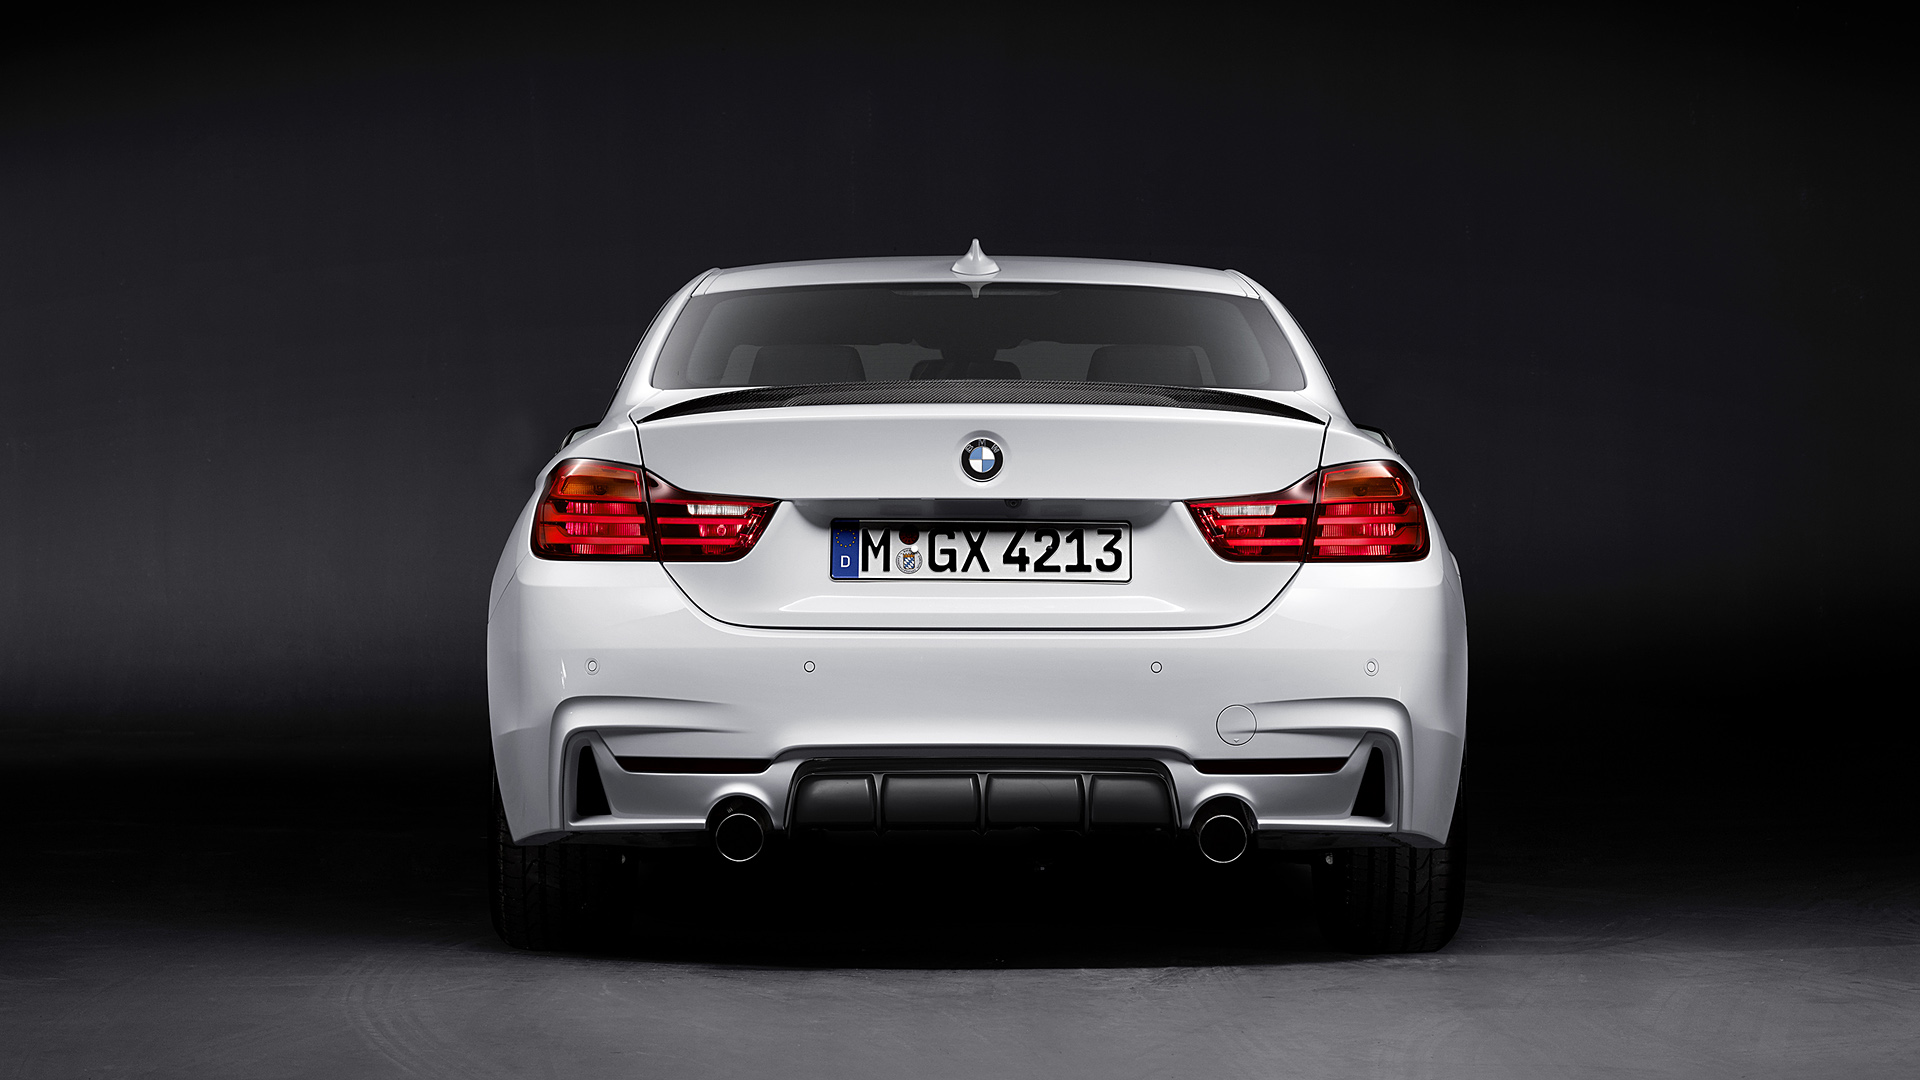  2014 BMW 4-Series Coupe M Performance Parts Wallpaper.